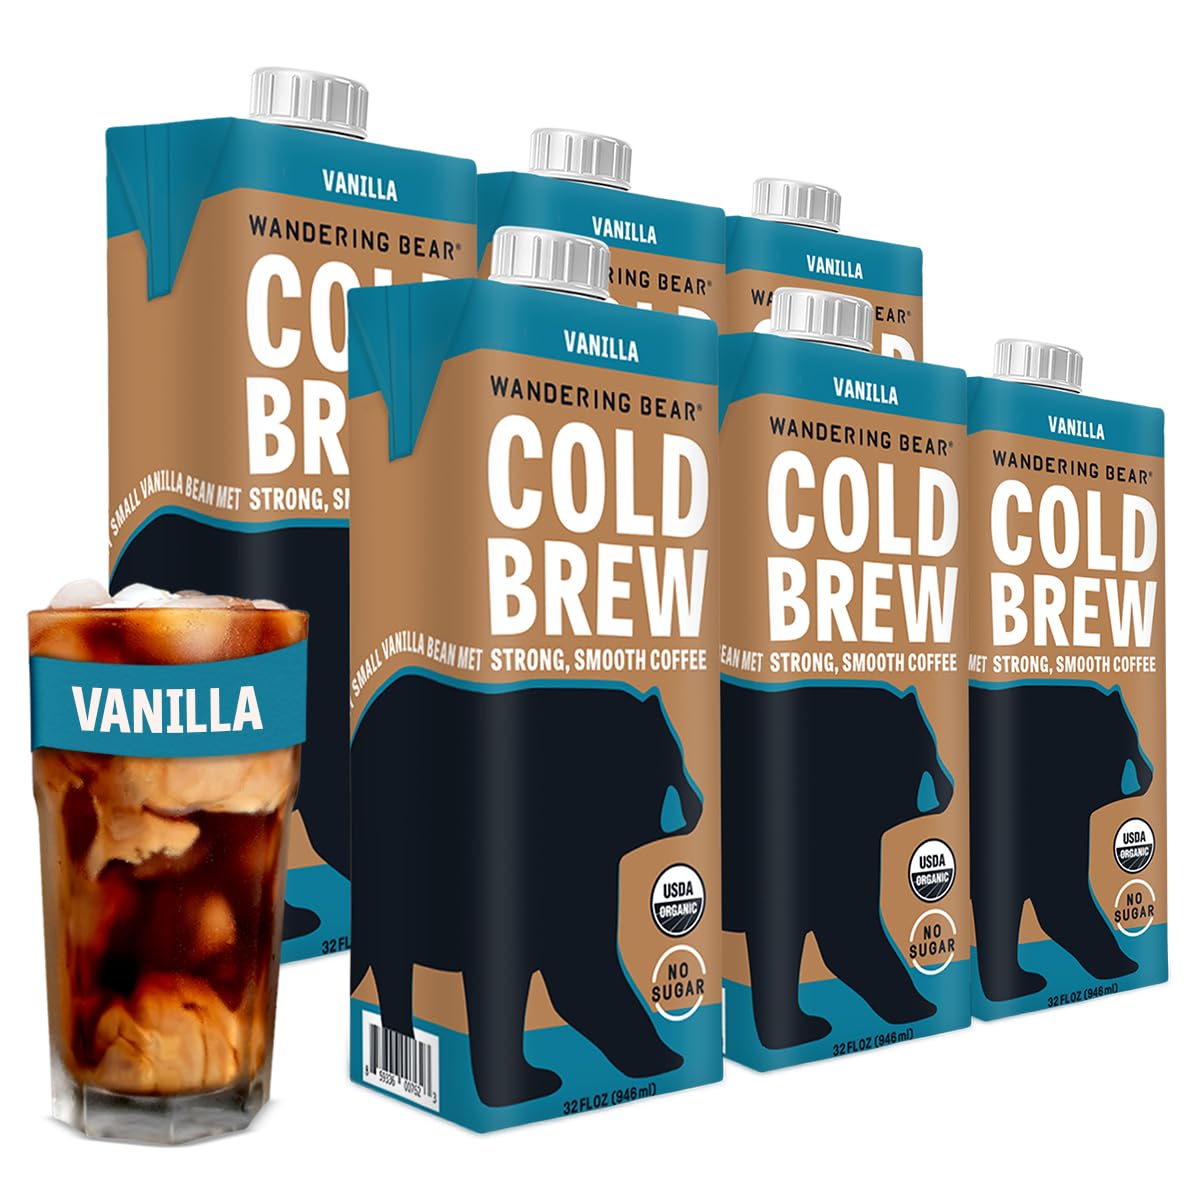 https://bigbigmart.com/wp-content/uploads/2023/07/Wandering-Bear-Organic-Vanilla-Cold-Brew-Coffee-32-fl-oz-6-pack-Extra-Strong-Smooth-Organic-Unsweetened-Shelf-Stable-and-Ready-to-Drink-Iced-Coffee-Cold-Brewed-Coffee-Cold-Coffee.jpg